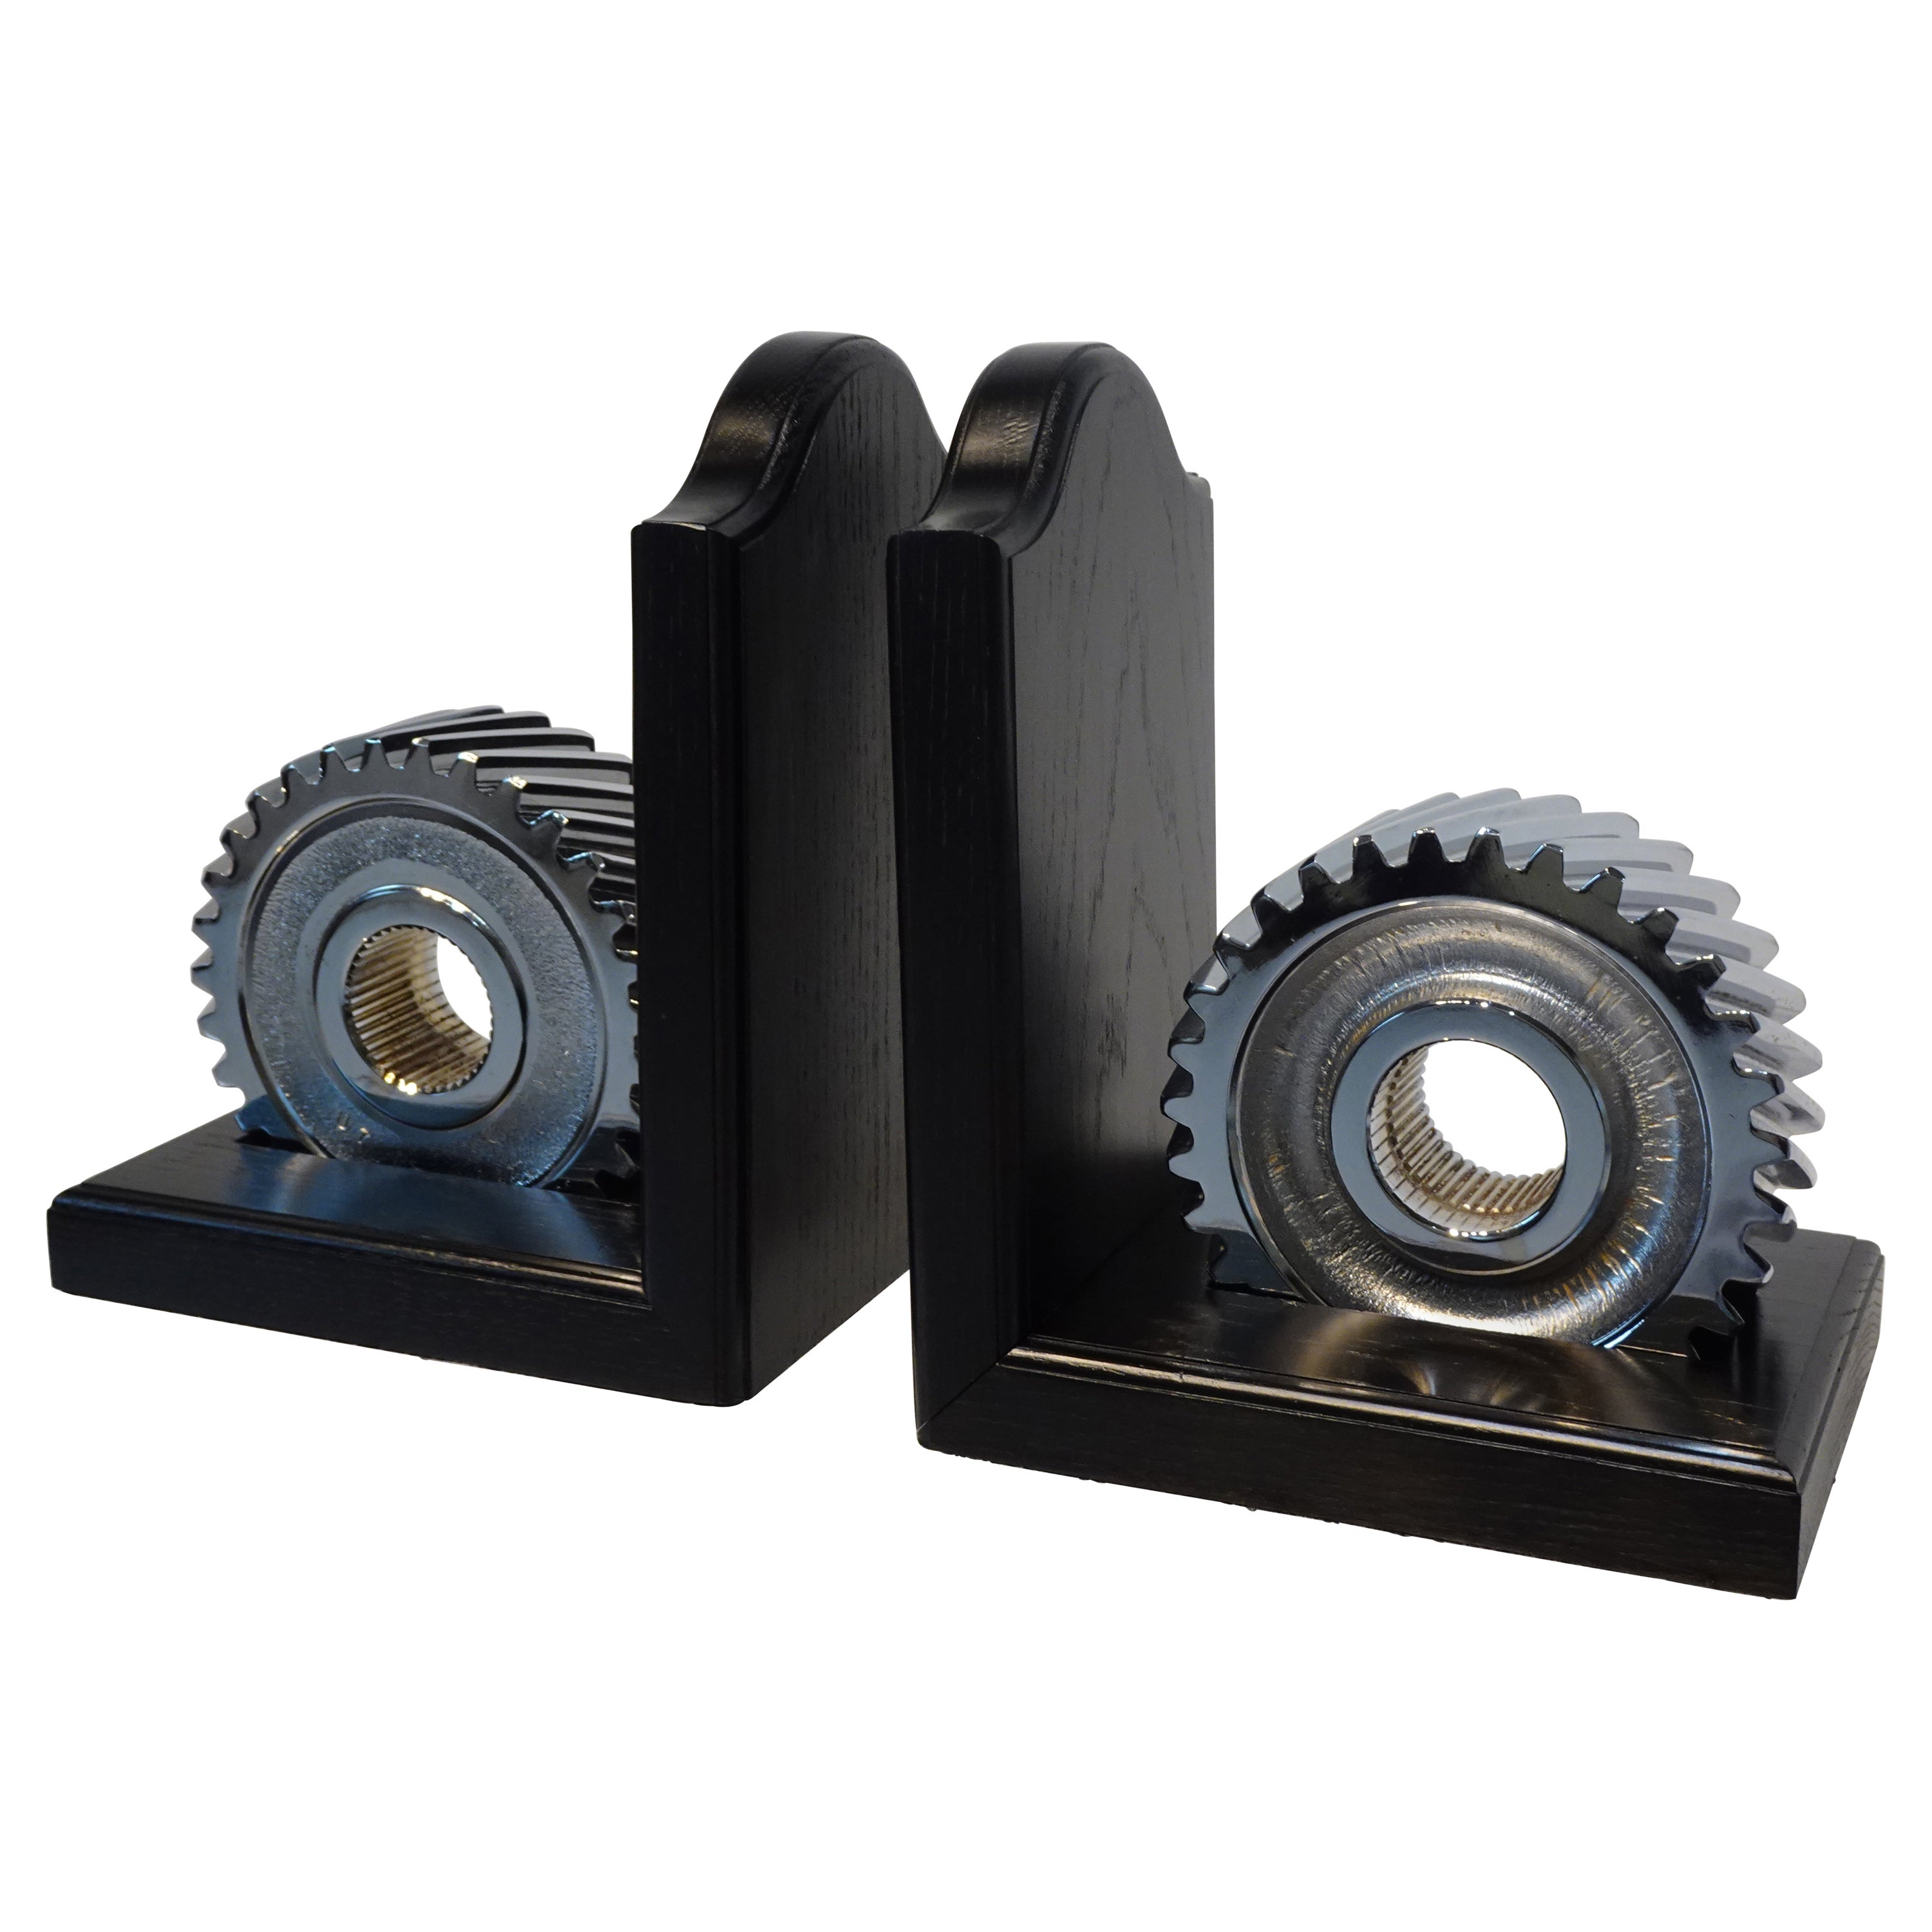 Chromed Industrial Gear / Wood Bookends